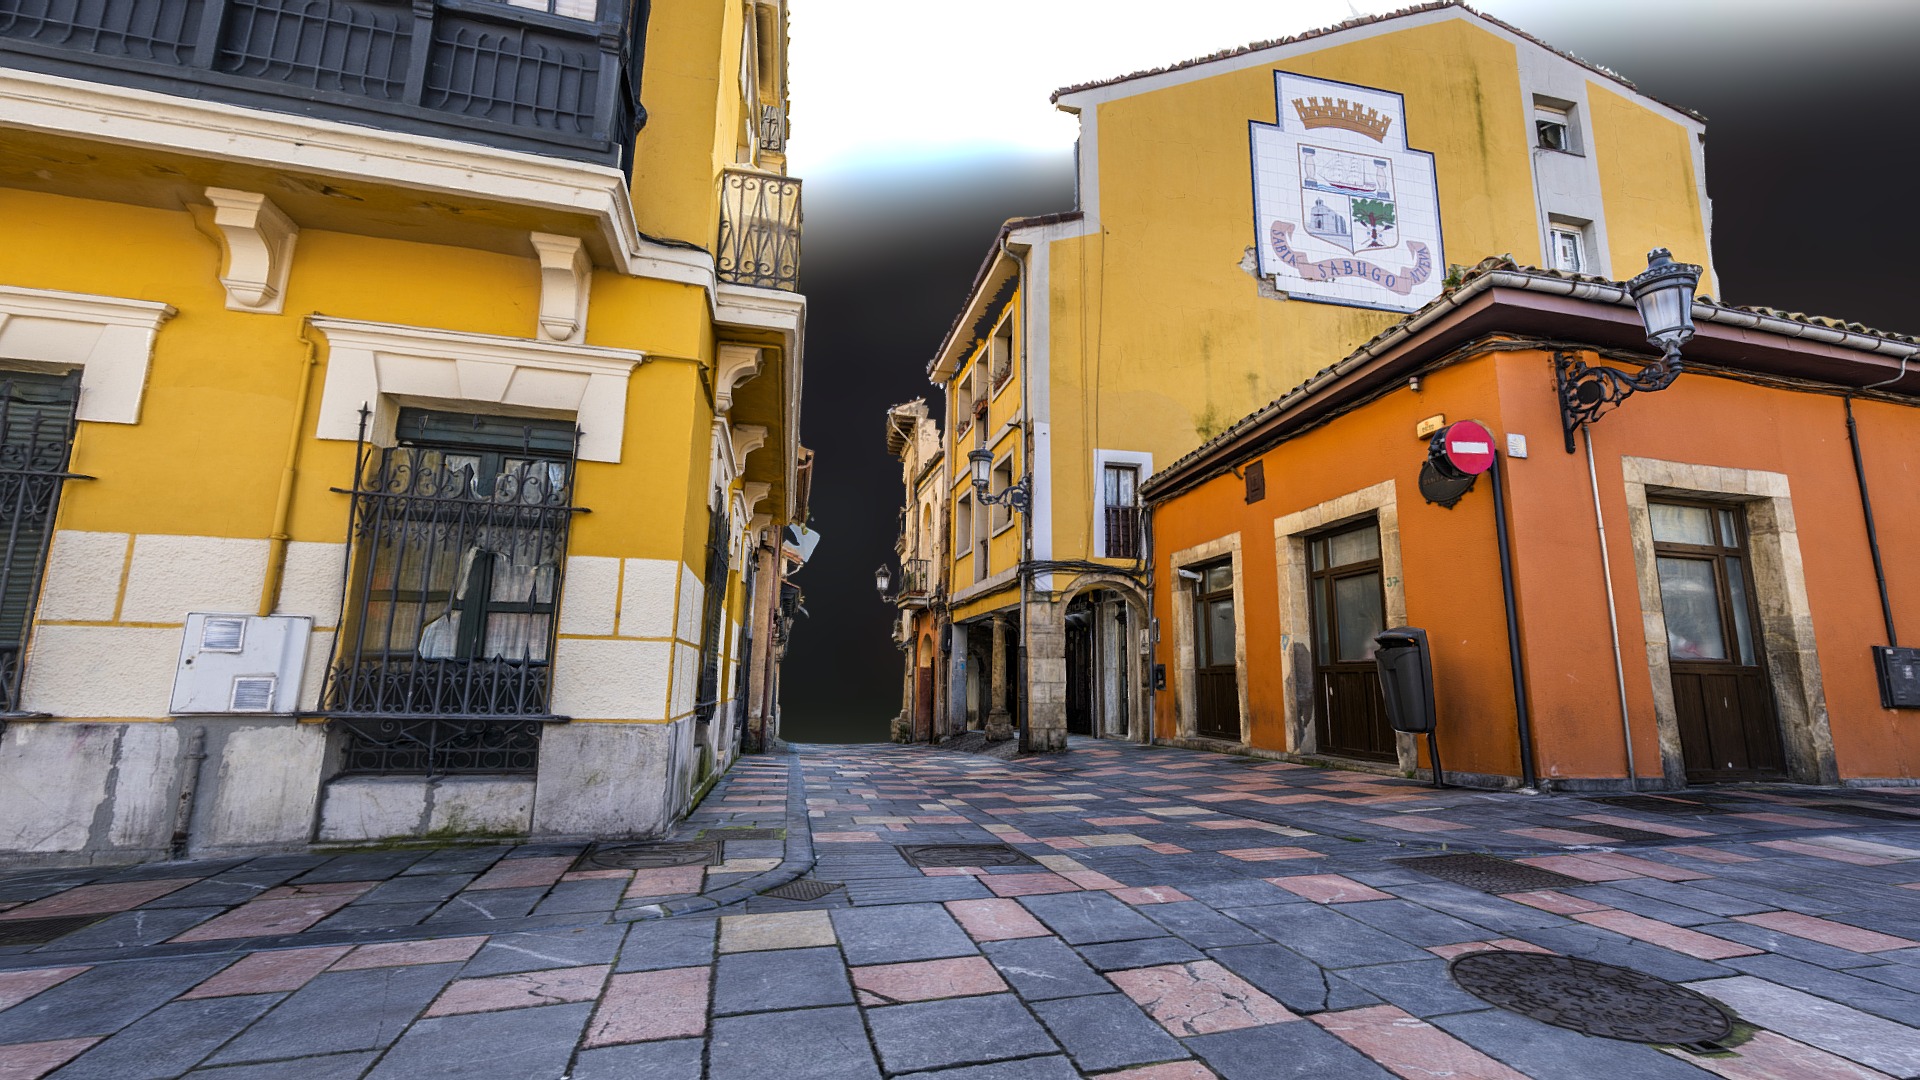 3D model Aviles houses photogrammetry scan - This is a 3D model of the Aviles houses photogrammetry scan. The 3D model is about a cobblestone street with buildings on either side of it.